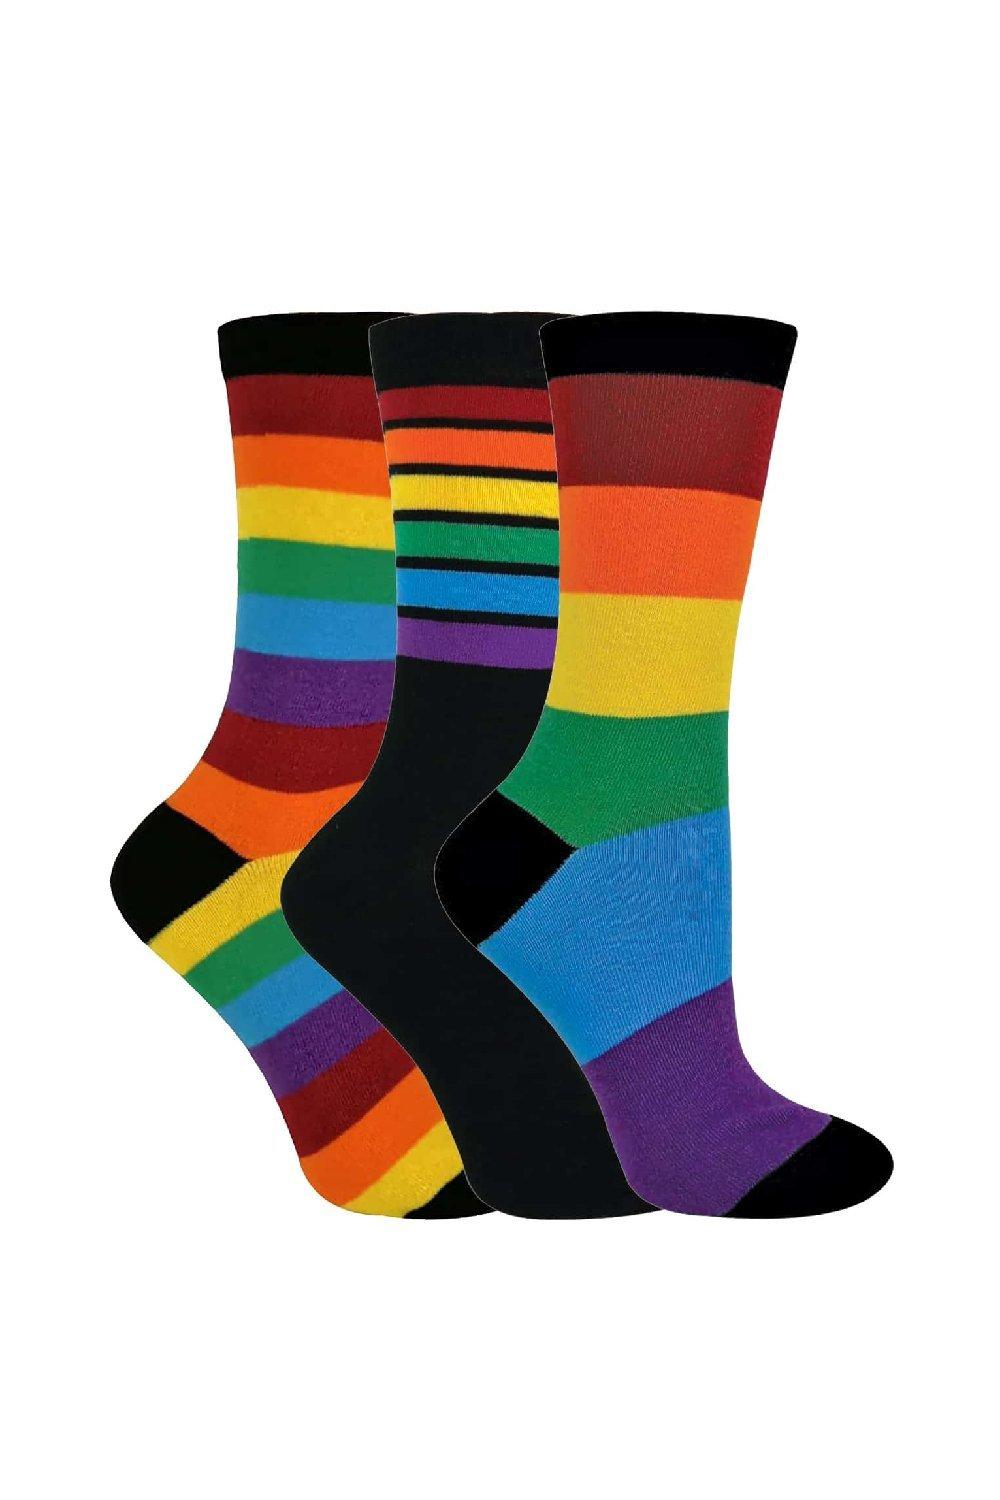 3 Pairs Bright Striped Patterned Colourful Rainbow Socks